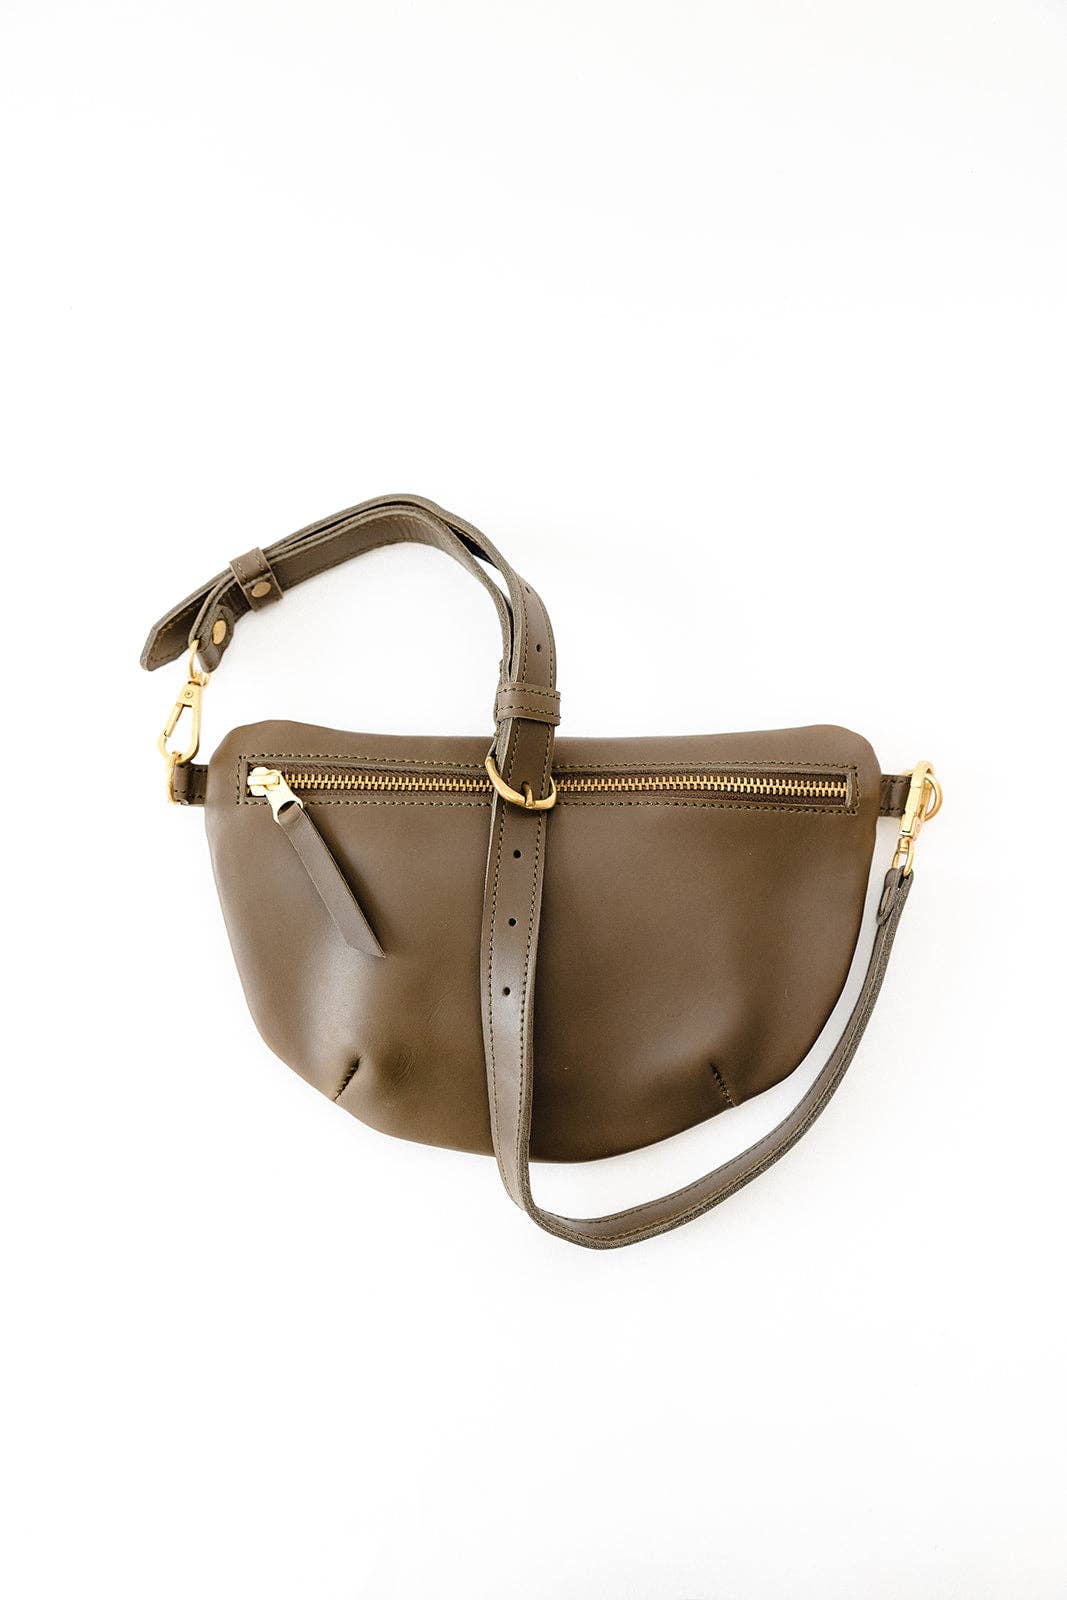 Fair trade and adjustable leather sling bag/fanny pack. Adjust the length to fit your needs. Handcrafted, vegetable tanned leather sling bag made in Kenya with locally and ethically-sourced materials. A portion of sales go to an organization in Tanzania empowering children living on the street. 